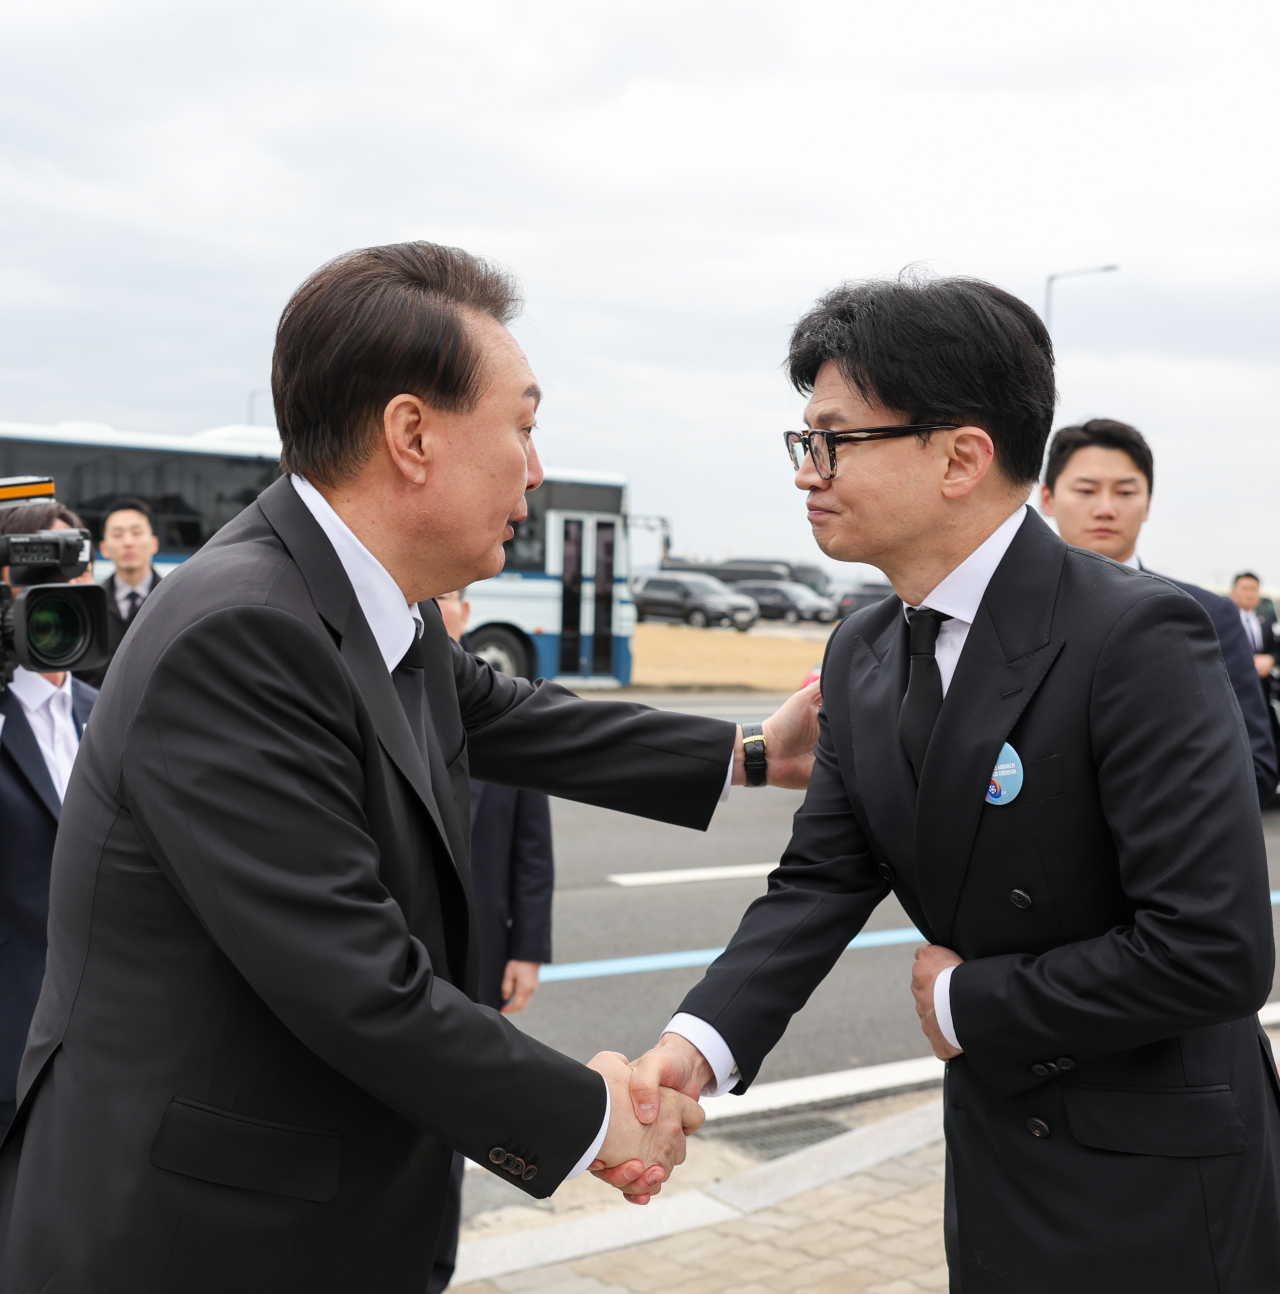 President Yoon Suk Yeol (left) and ruling People Power Party chief Han Dong-hoon shake hands during a ceremony marking West Sea Defense Day at the Navy's 2nd Fleet Command in Pyeongtaek, 60 kilometers south of Seoul, Friday. (Presidential Office)